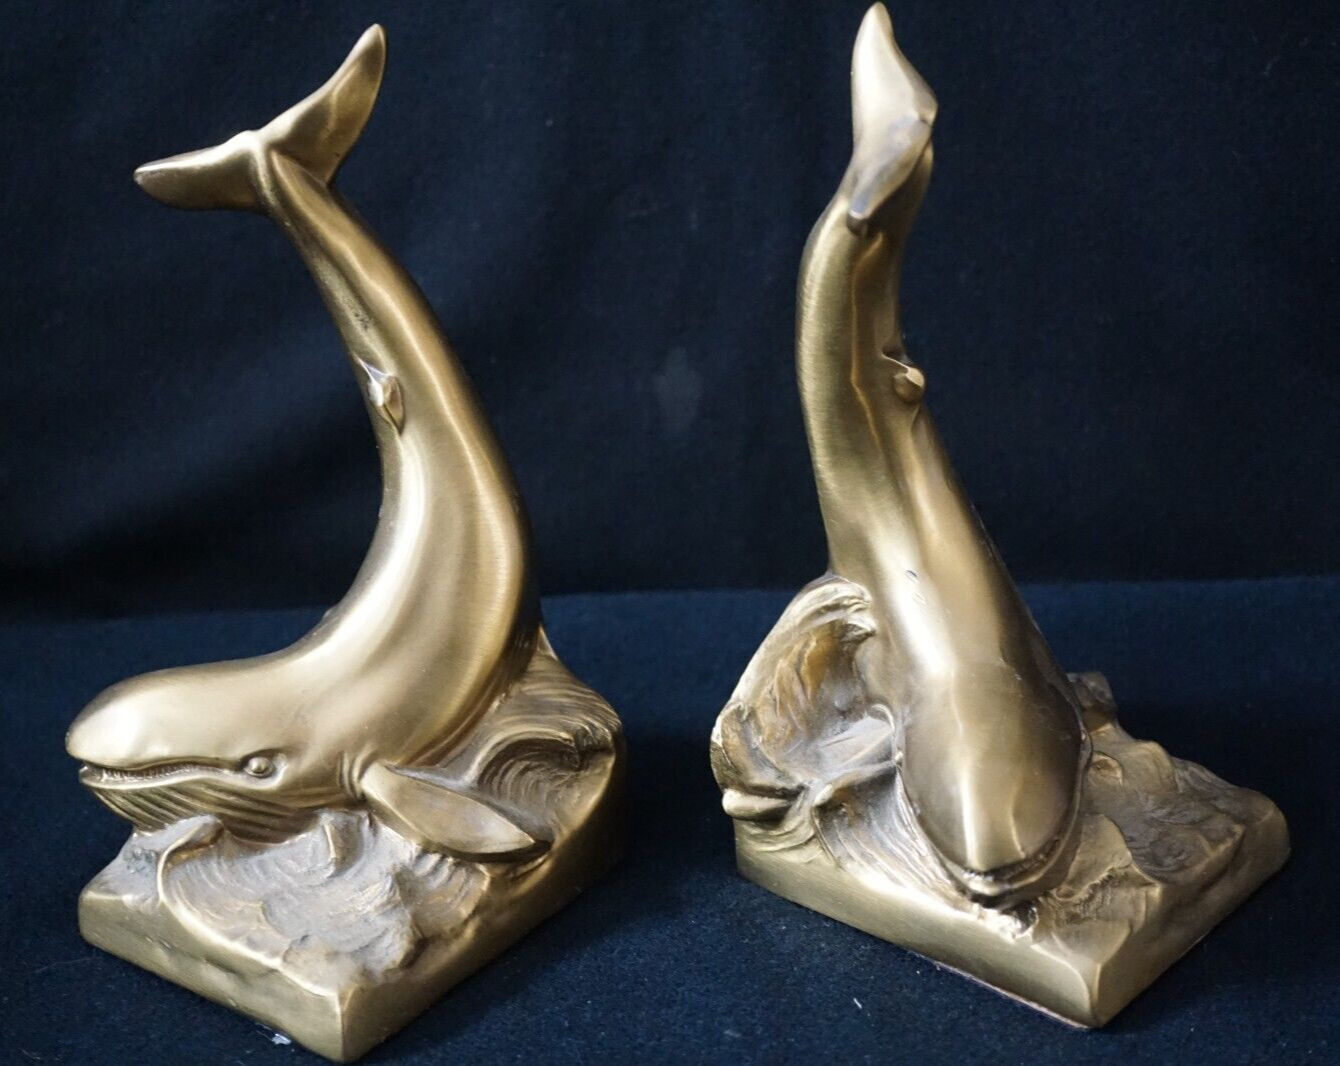 PAIR OF PM CRAFTSMEN BRASS BOOKENDS - SPERM WHALES - 7 1/2 INCHES TALL HEAVY